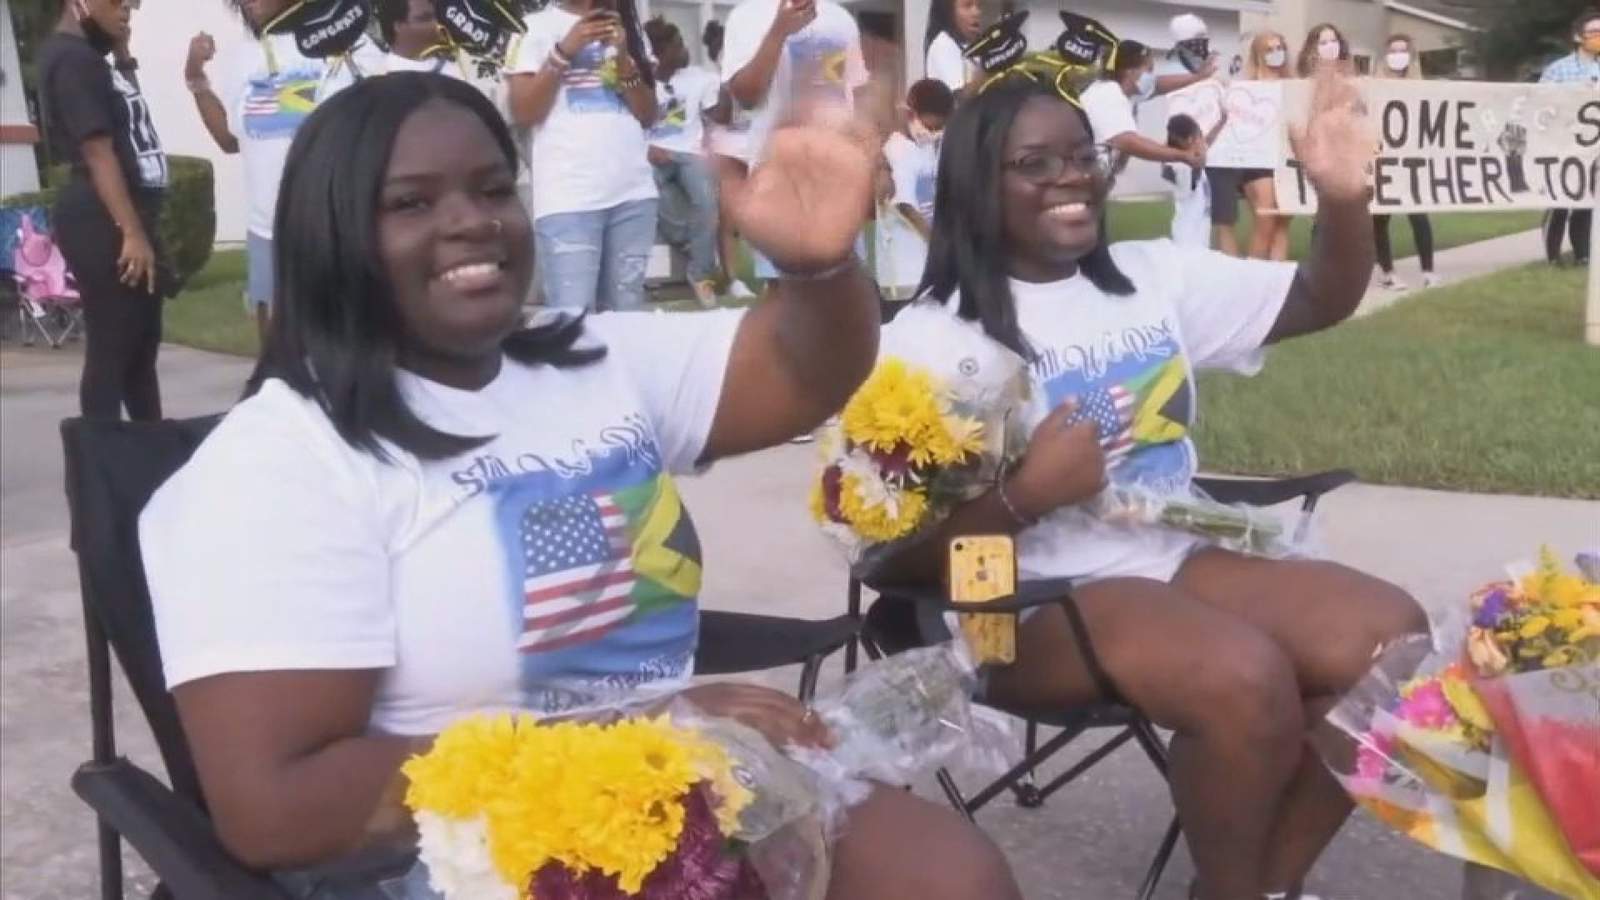 Community rallies behind graduating twins who received racist letter